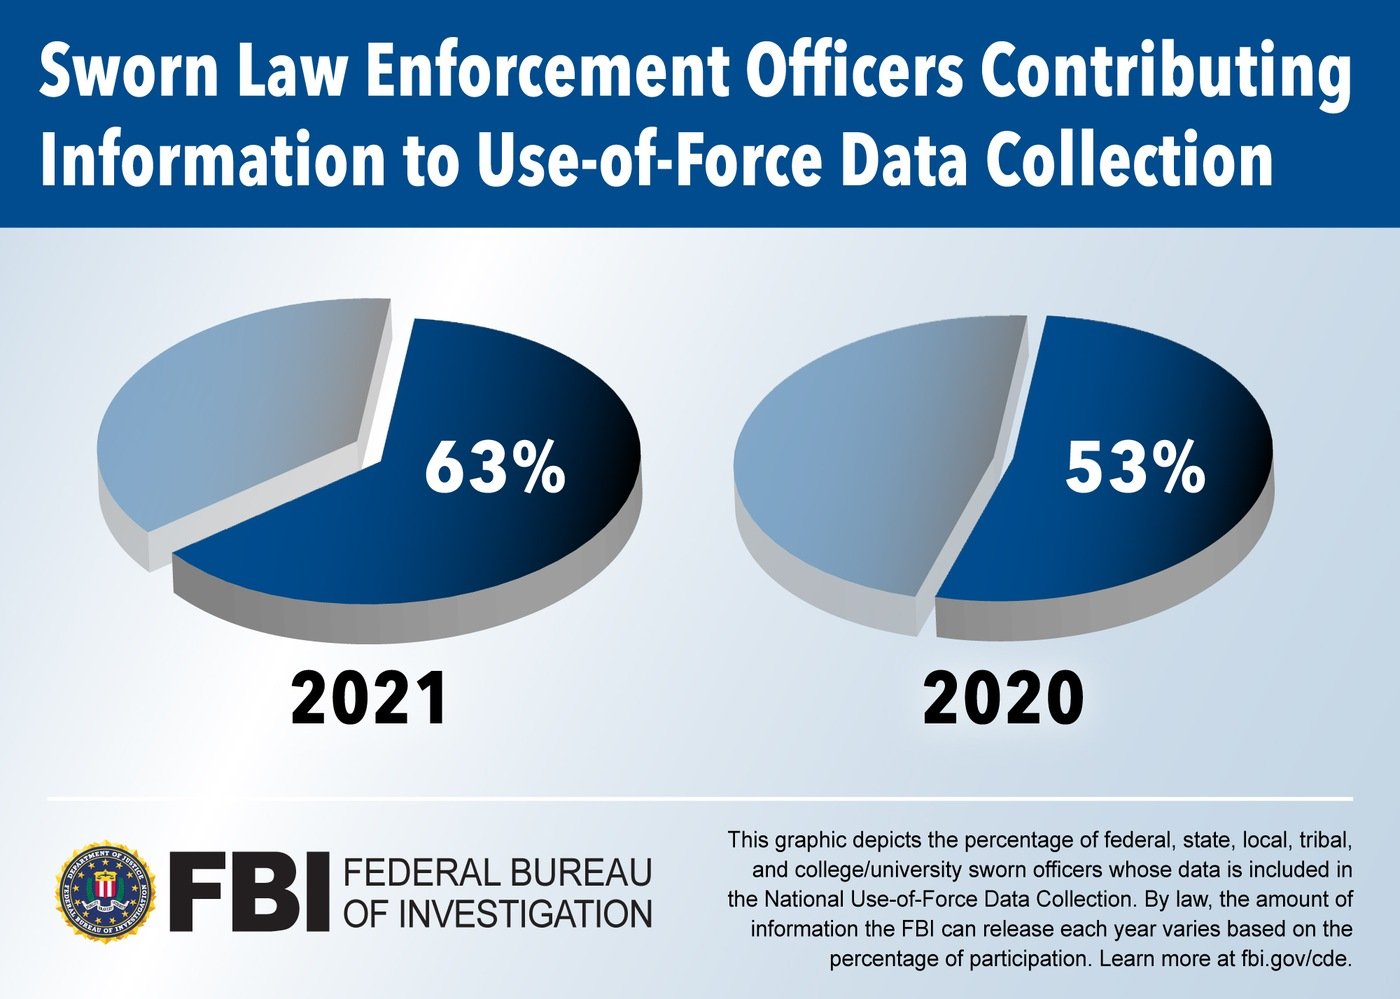 Infographic depicting the percentage of sworn law enforcement officers contributing data to the National Use-of-Force Data Collection 